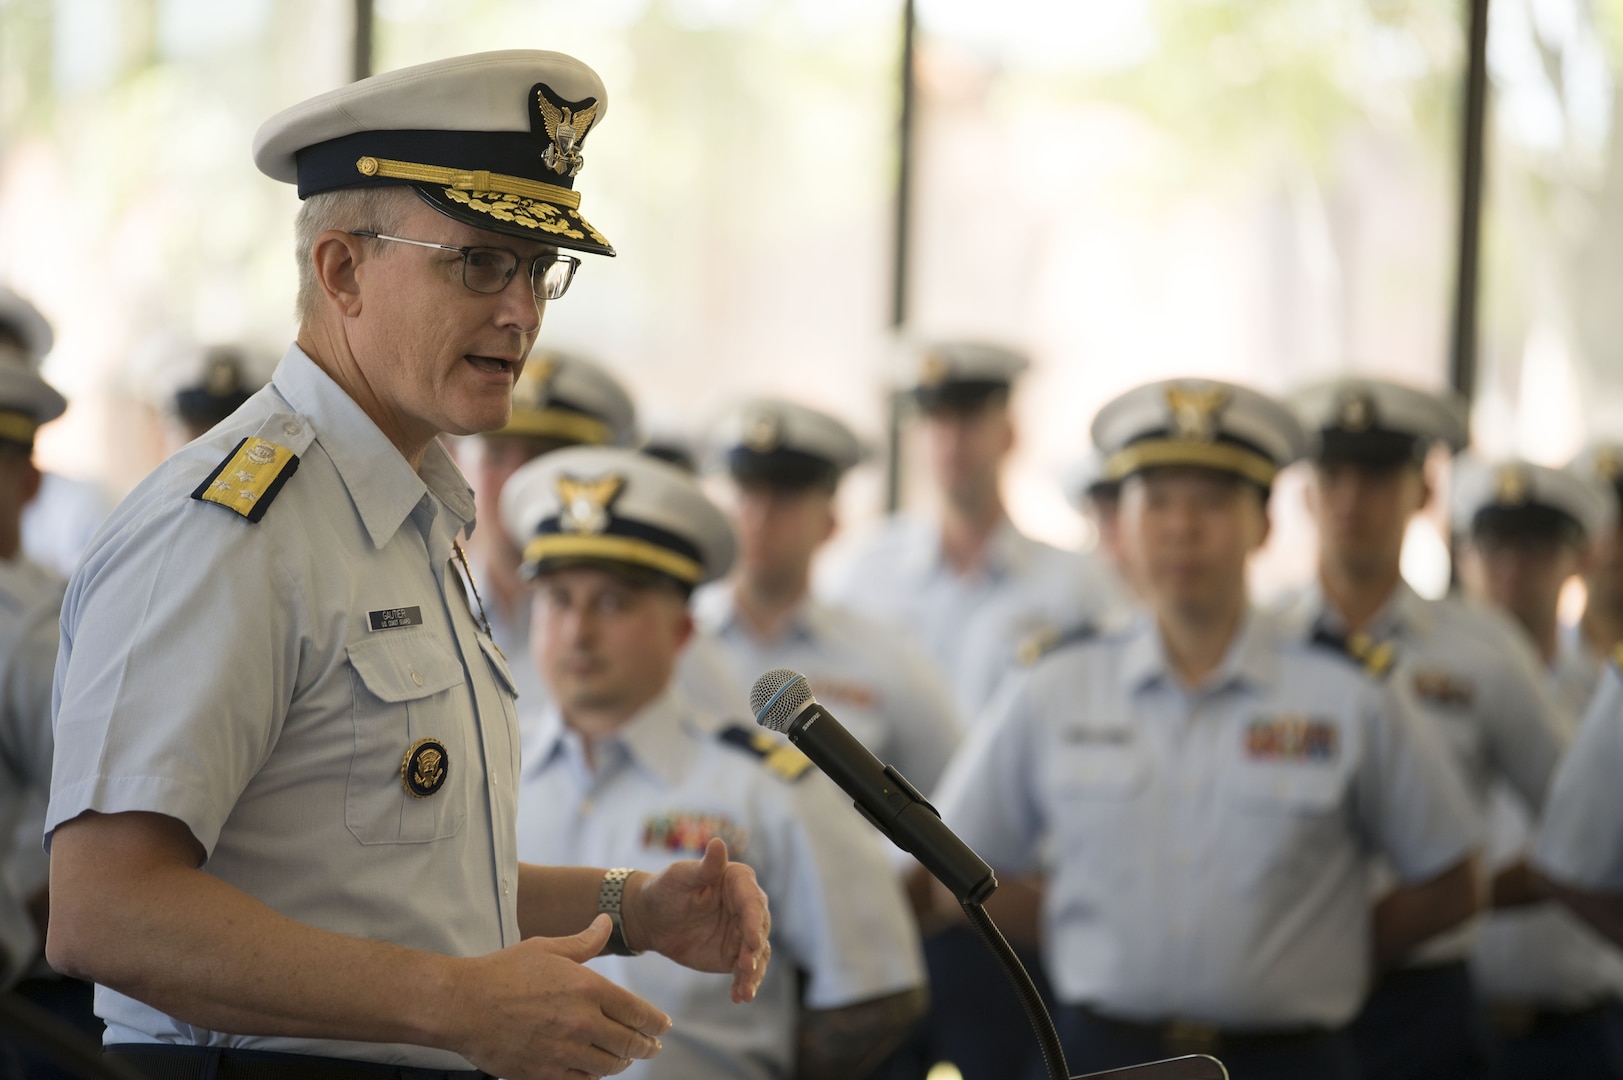 Vice Adm. Peter W. Gautier, Deputy Commandant for Operations, presided over 2003 Cyber Protection Team's establishment ceremony held at Coast Guard Island, Alameda, California, Aug. 1, 2023. The new unit's mission is to provide assessments, hunt cyber threats, and supply incident response capabilities to the Marine Transportation System. (U.S. Coast Guard Photo by Petty Officer 2nd Class Edward Wargo)